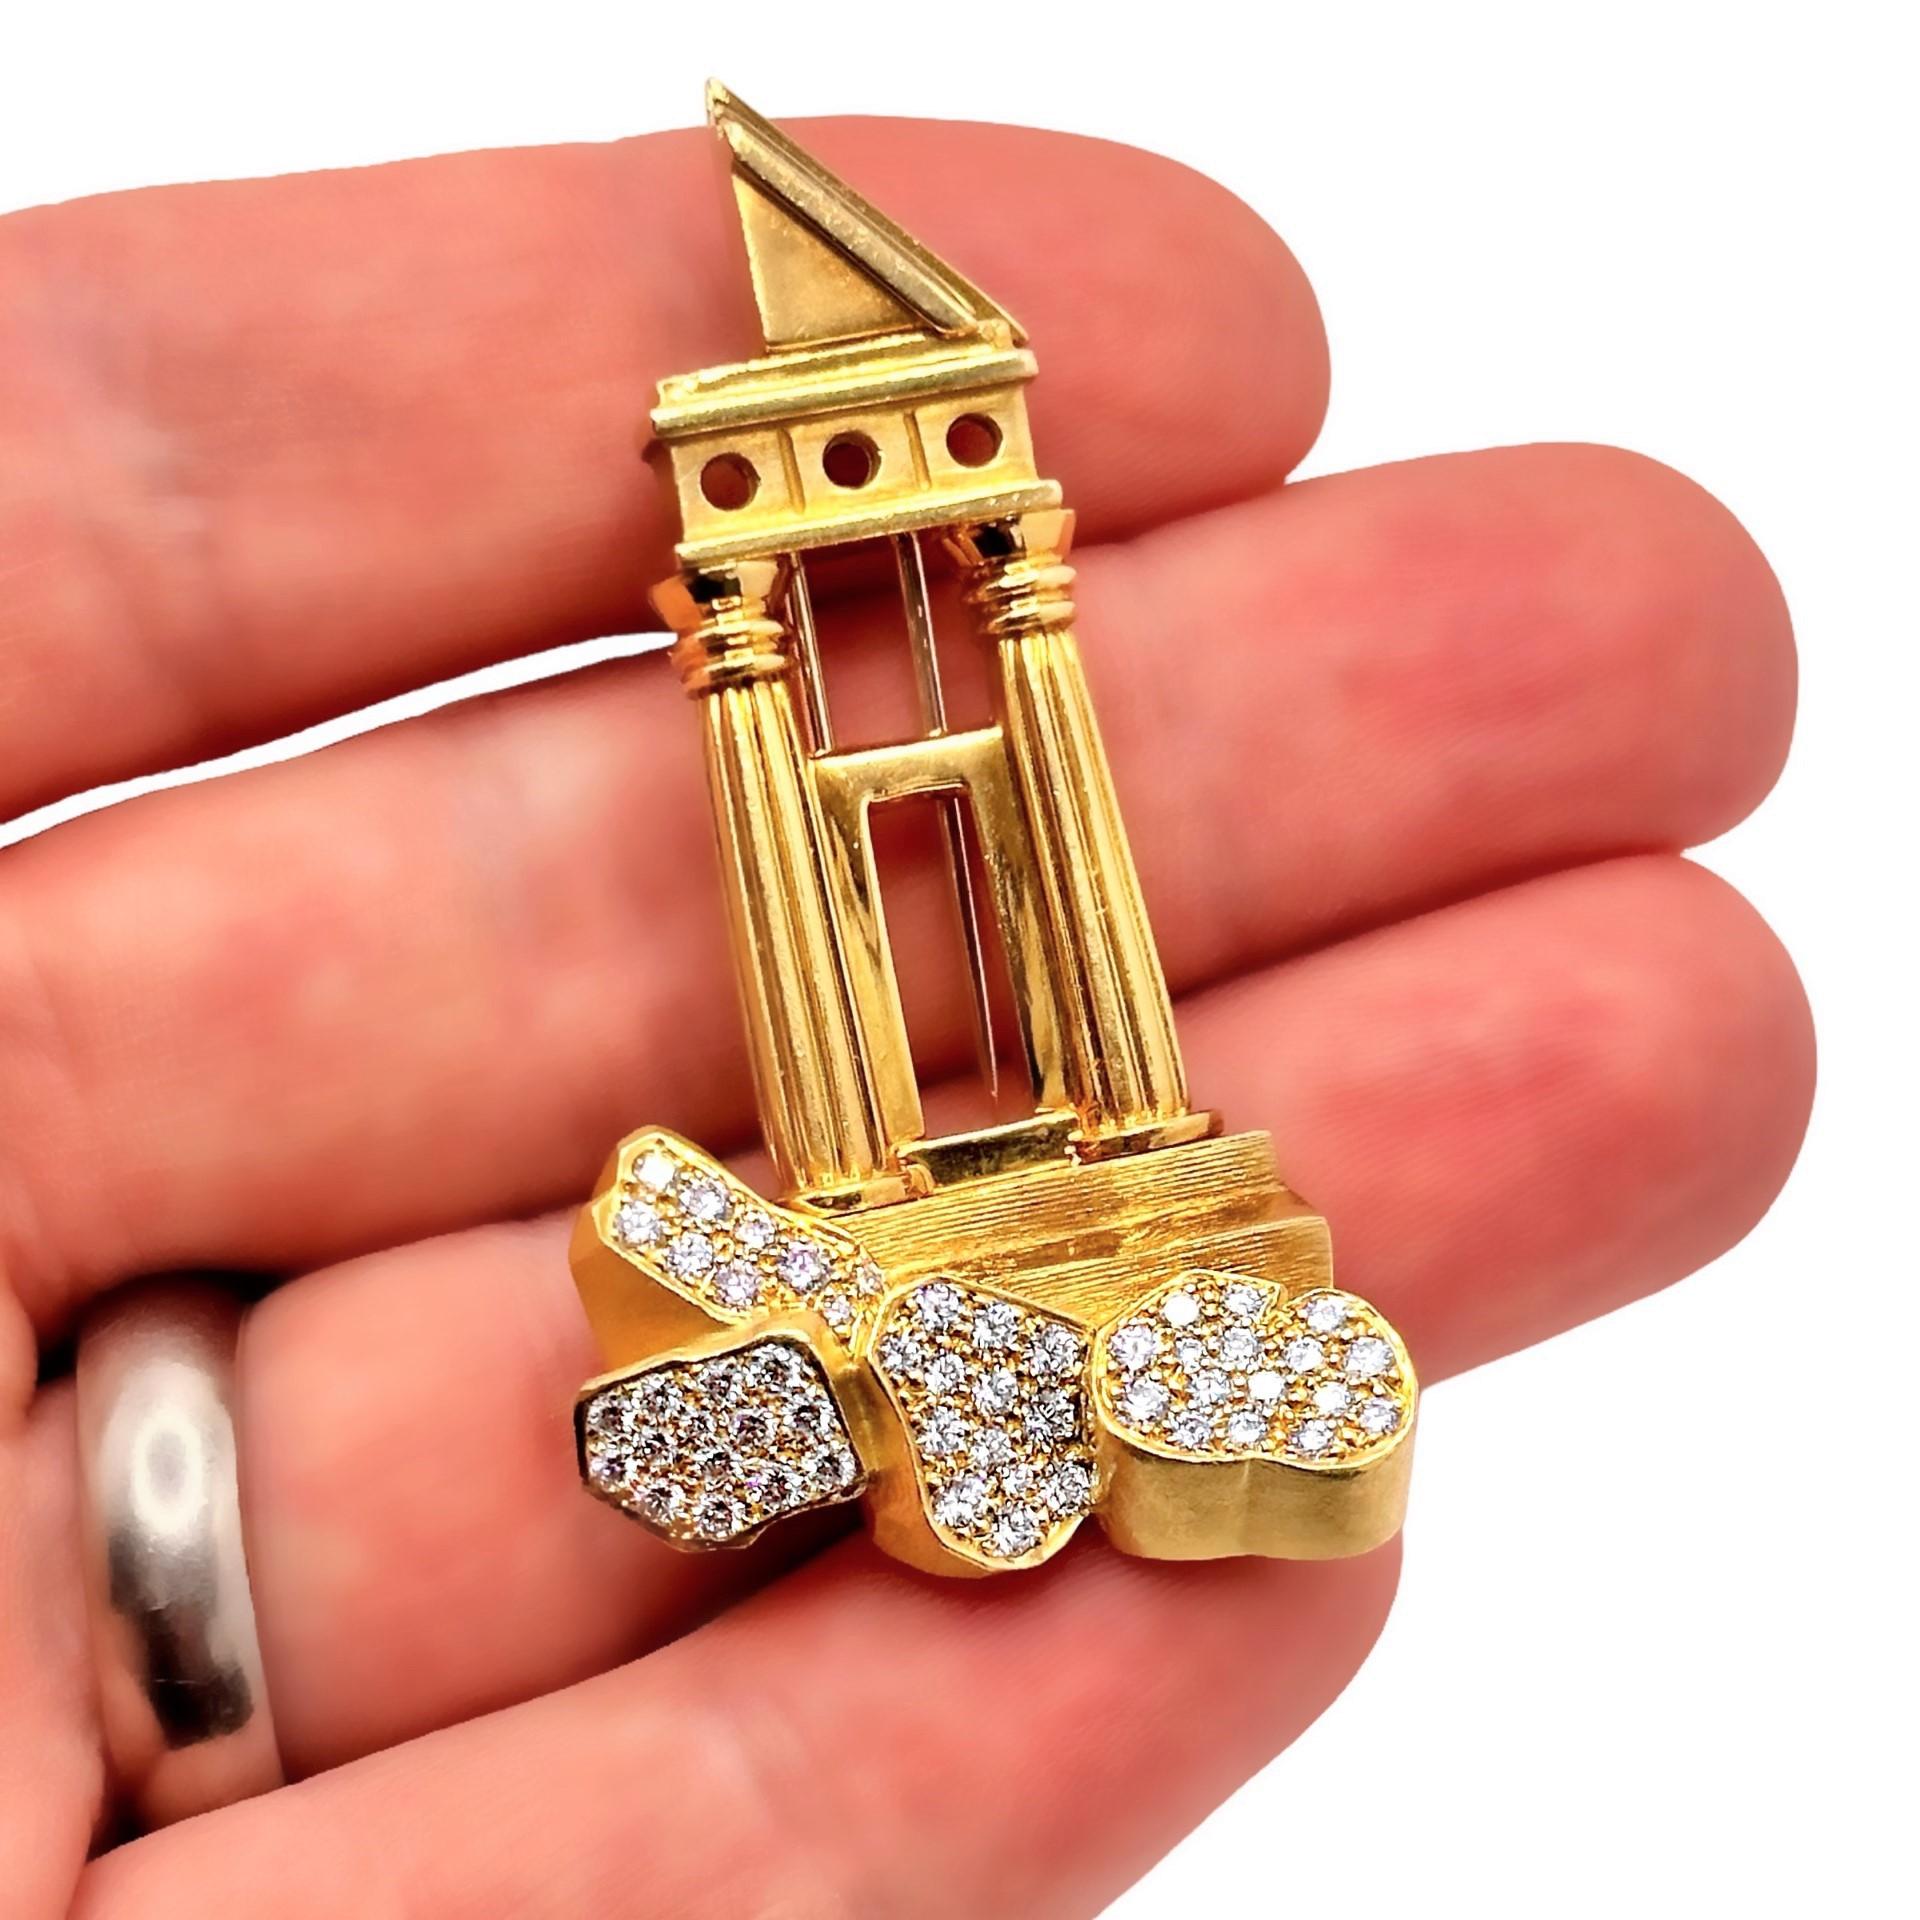 Vintage Dunay Architectural Brooch in 18k Gold and Diamonds For Sale 3